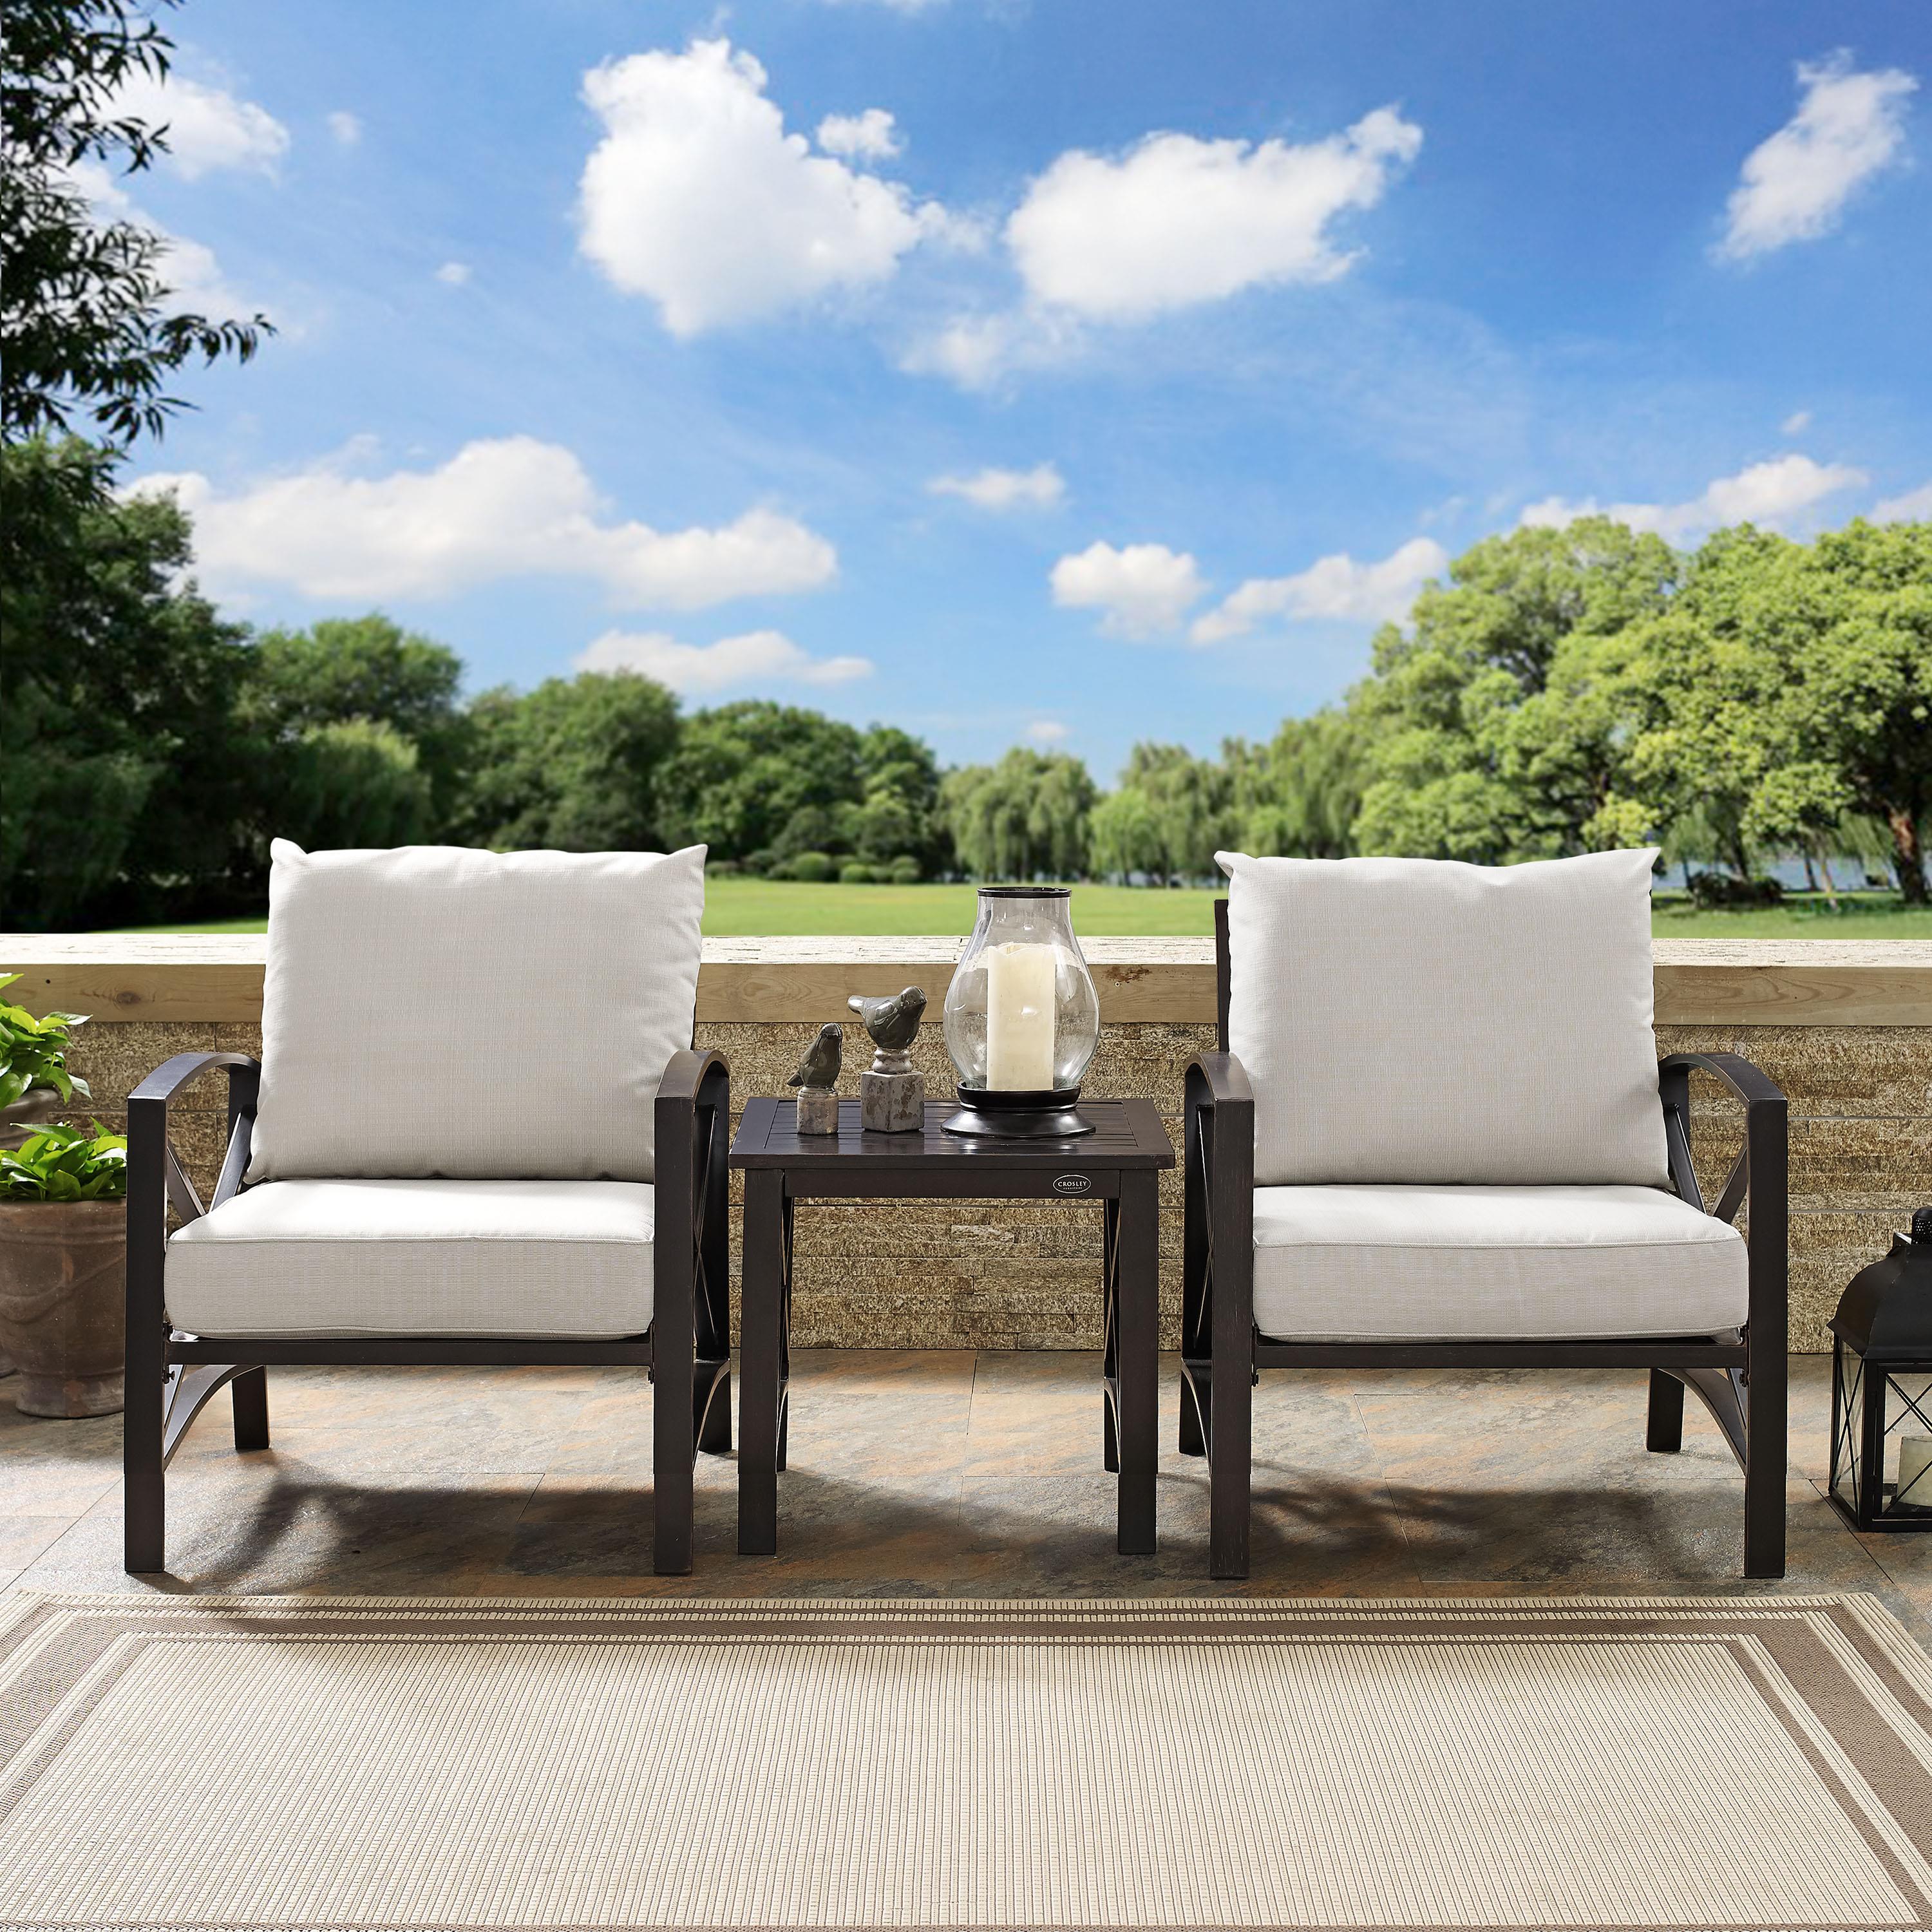 Crosley Furniture Kaplan 3 Pc Outdoor Seating Set With Oatmeal Cushion - Two Chairs, Side Table - image 3 of 8